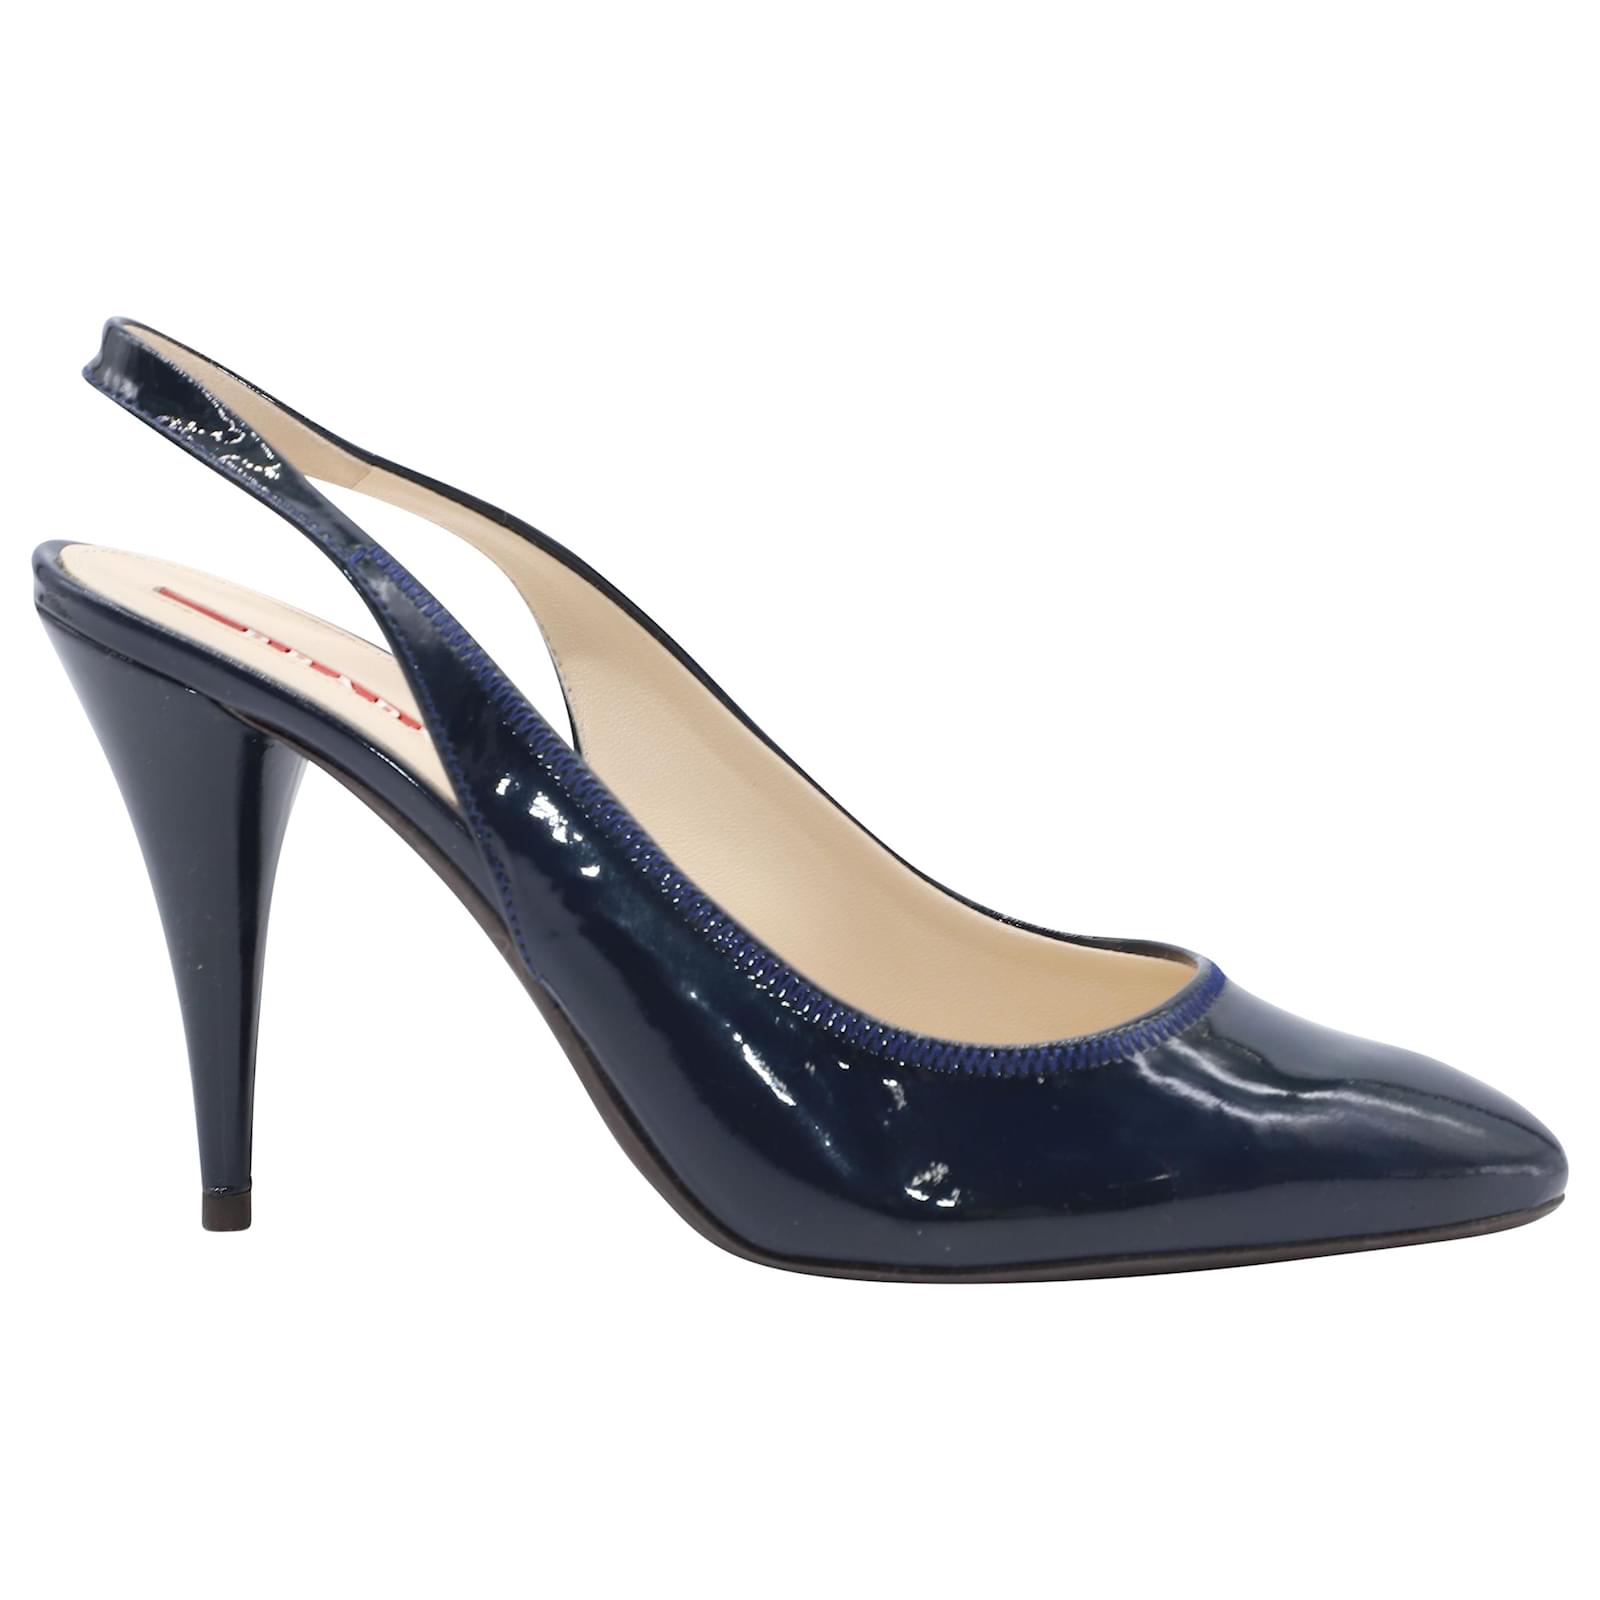 BRAND NEW BODEN NAVY BLUE & TURQUOISE PATENT LEATHER SLINGBACK HEELS S –  Whispers Dress Agency